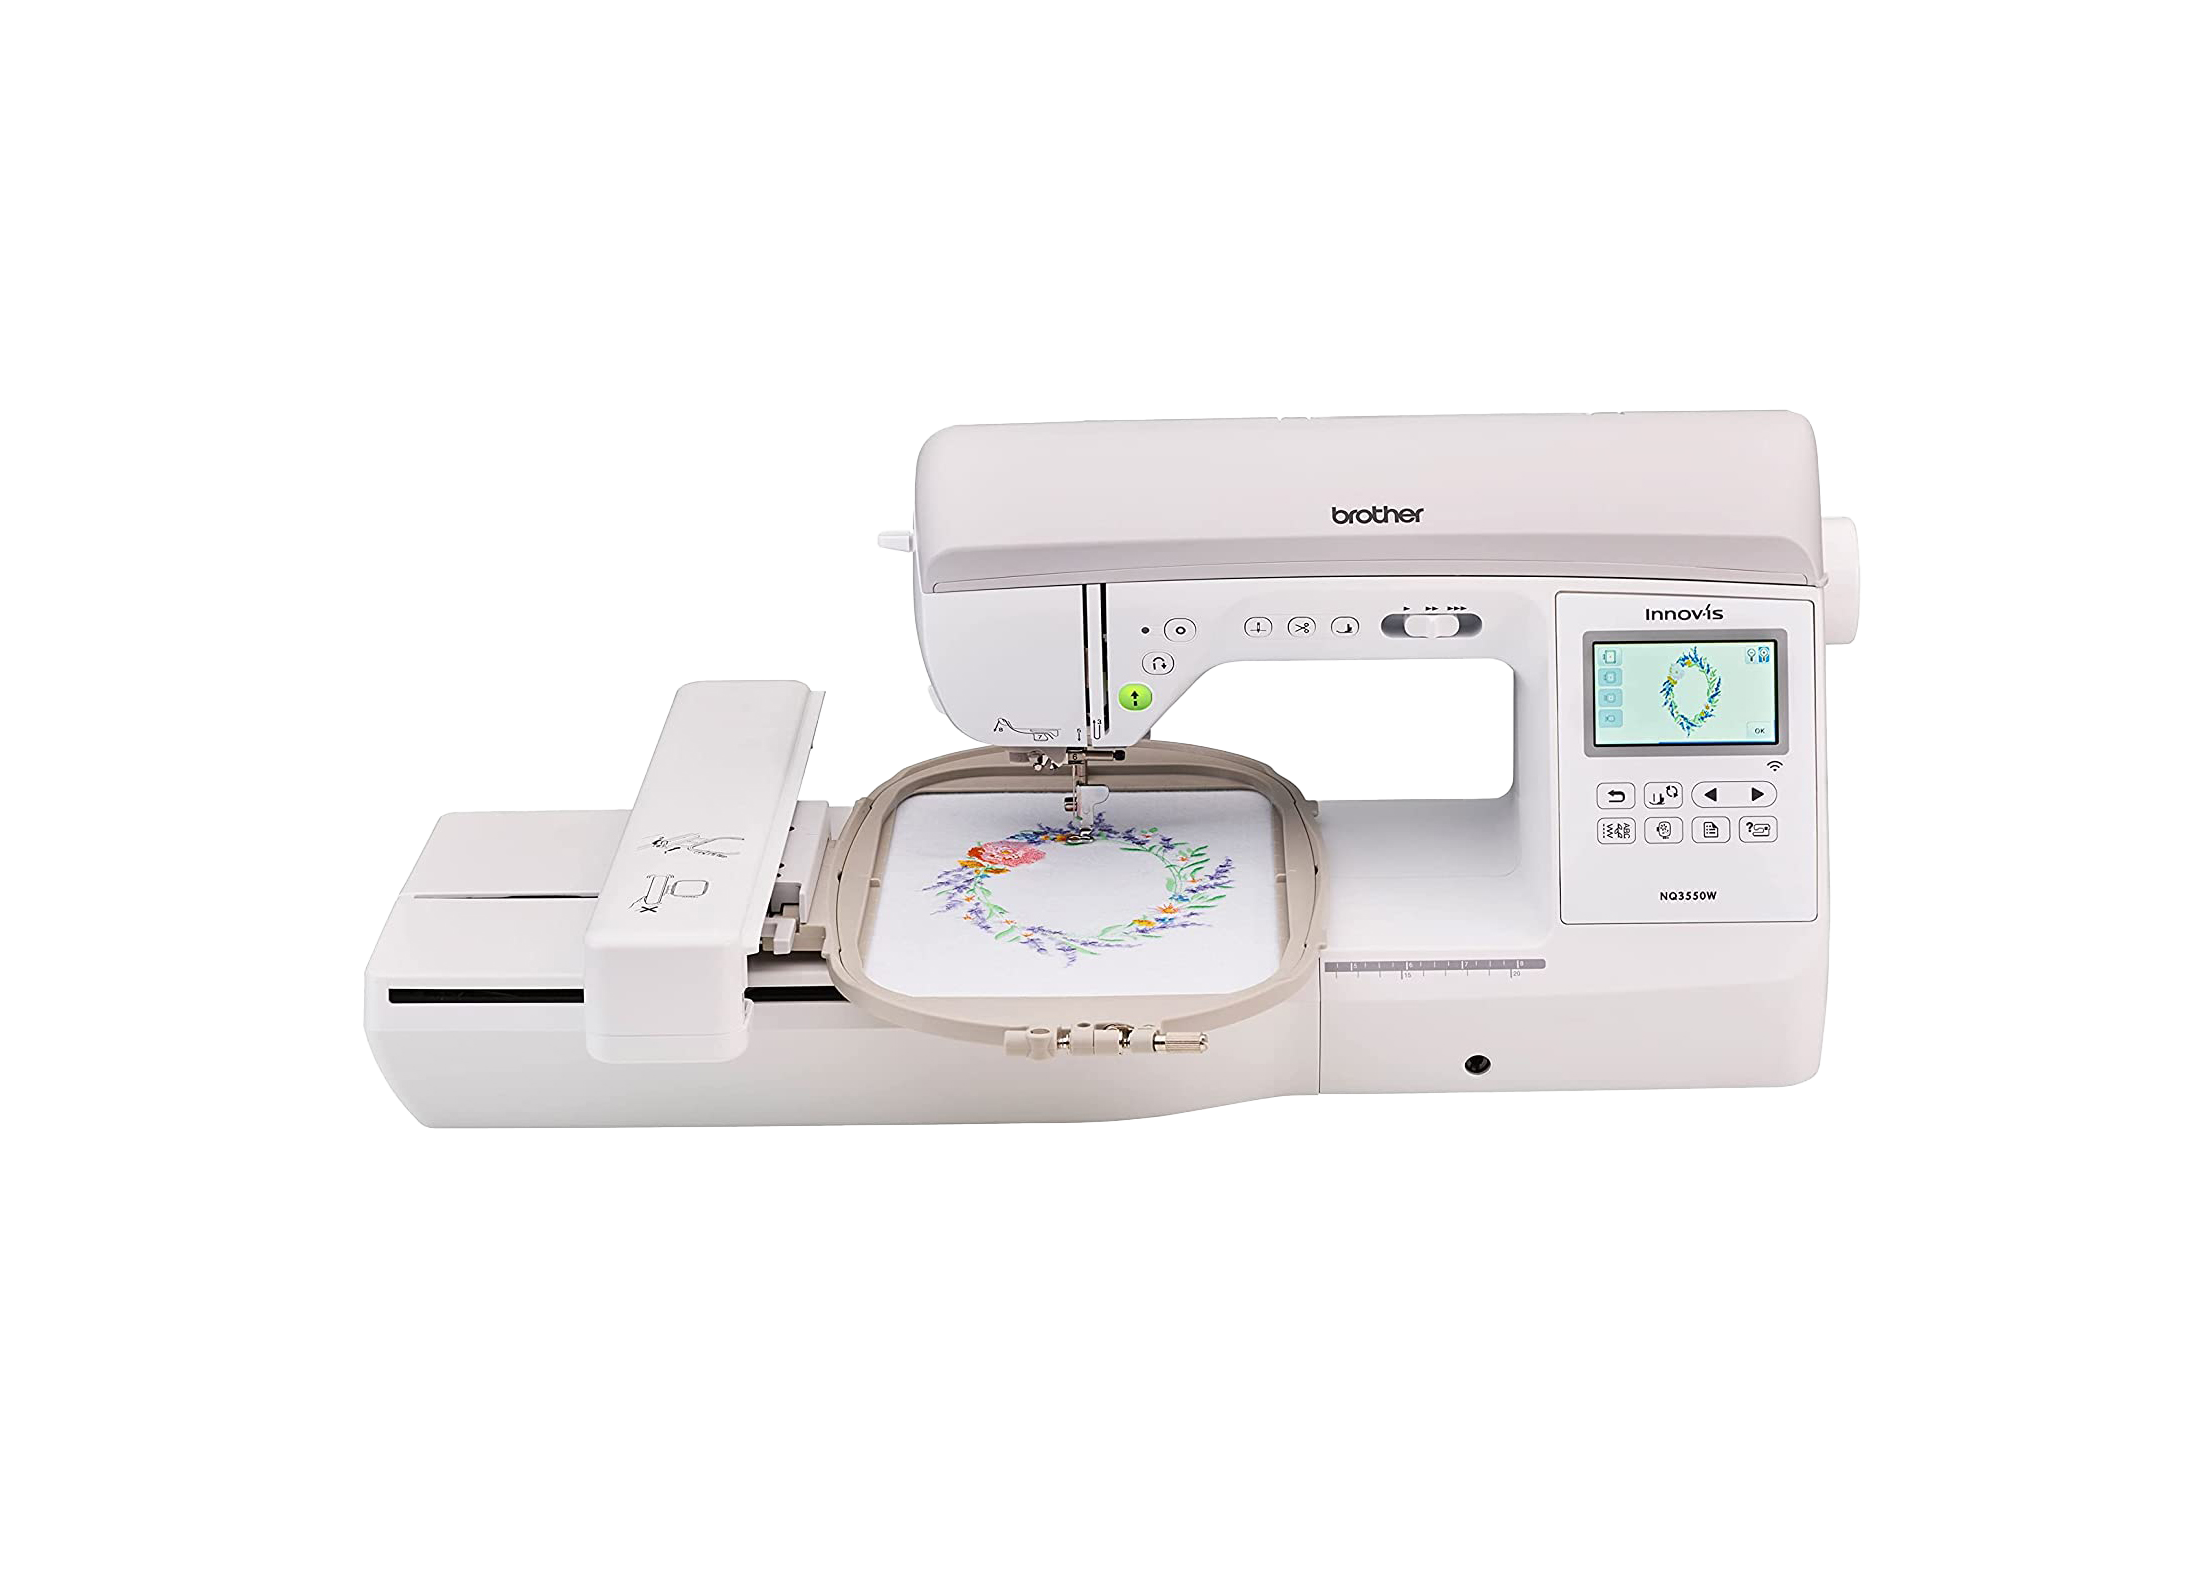 Brother NQ3550W Sewing and Embroidery Machine 10x6 for Sale at World Weidner